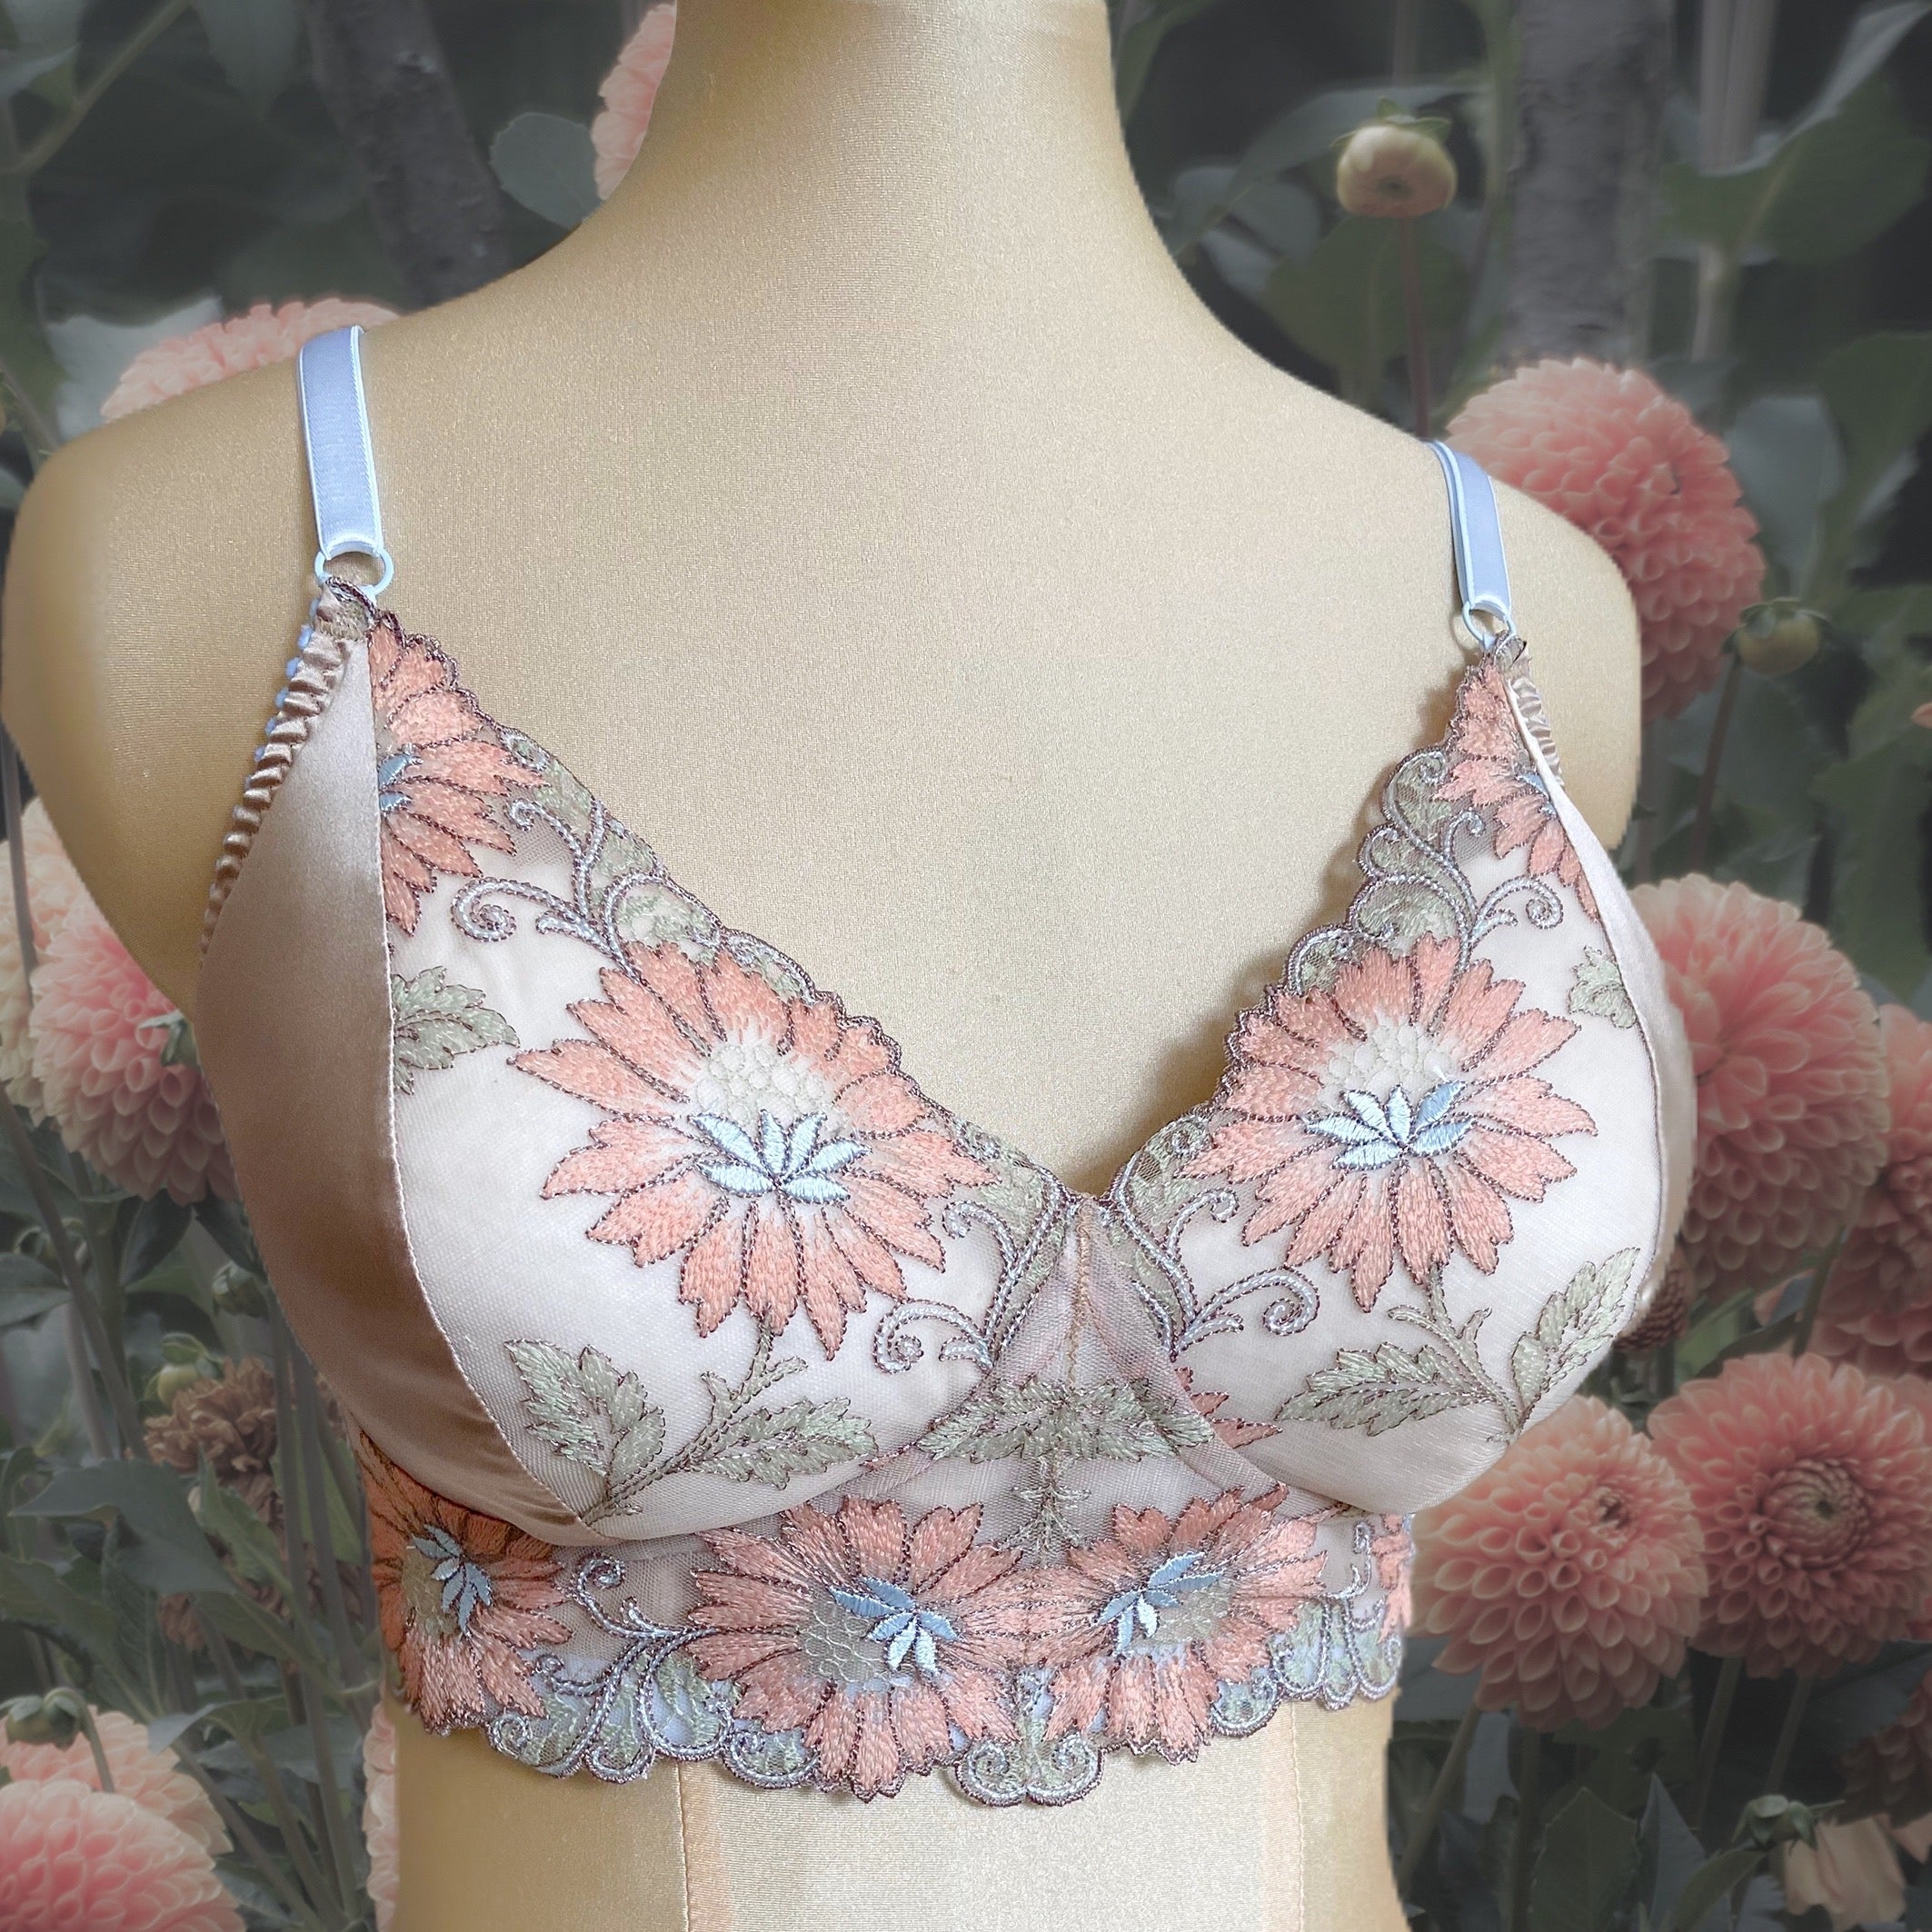 How To Fit Bra Cups · How To Make A Bra · Needlework on Cut Out + Keep